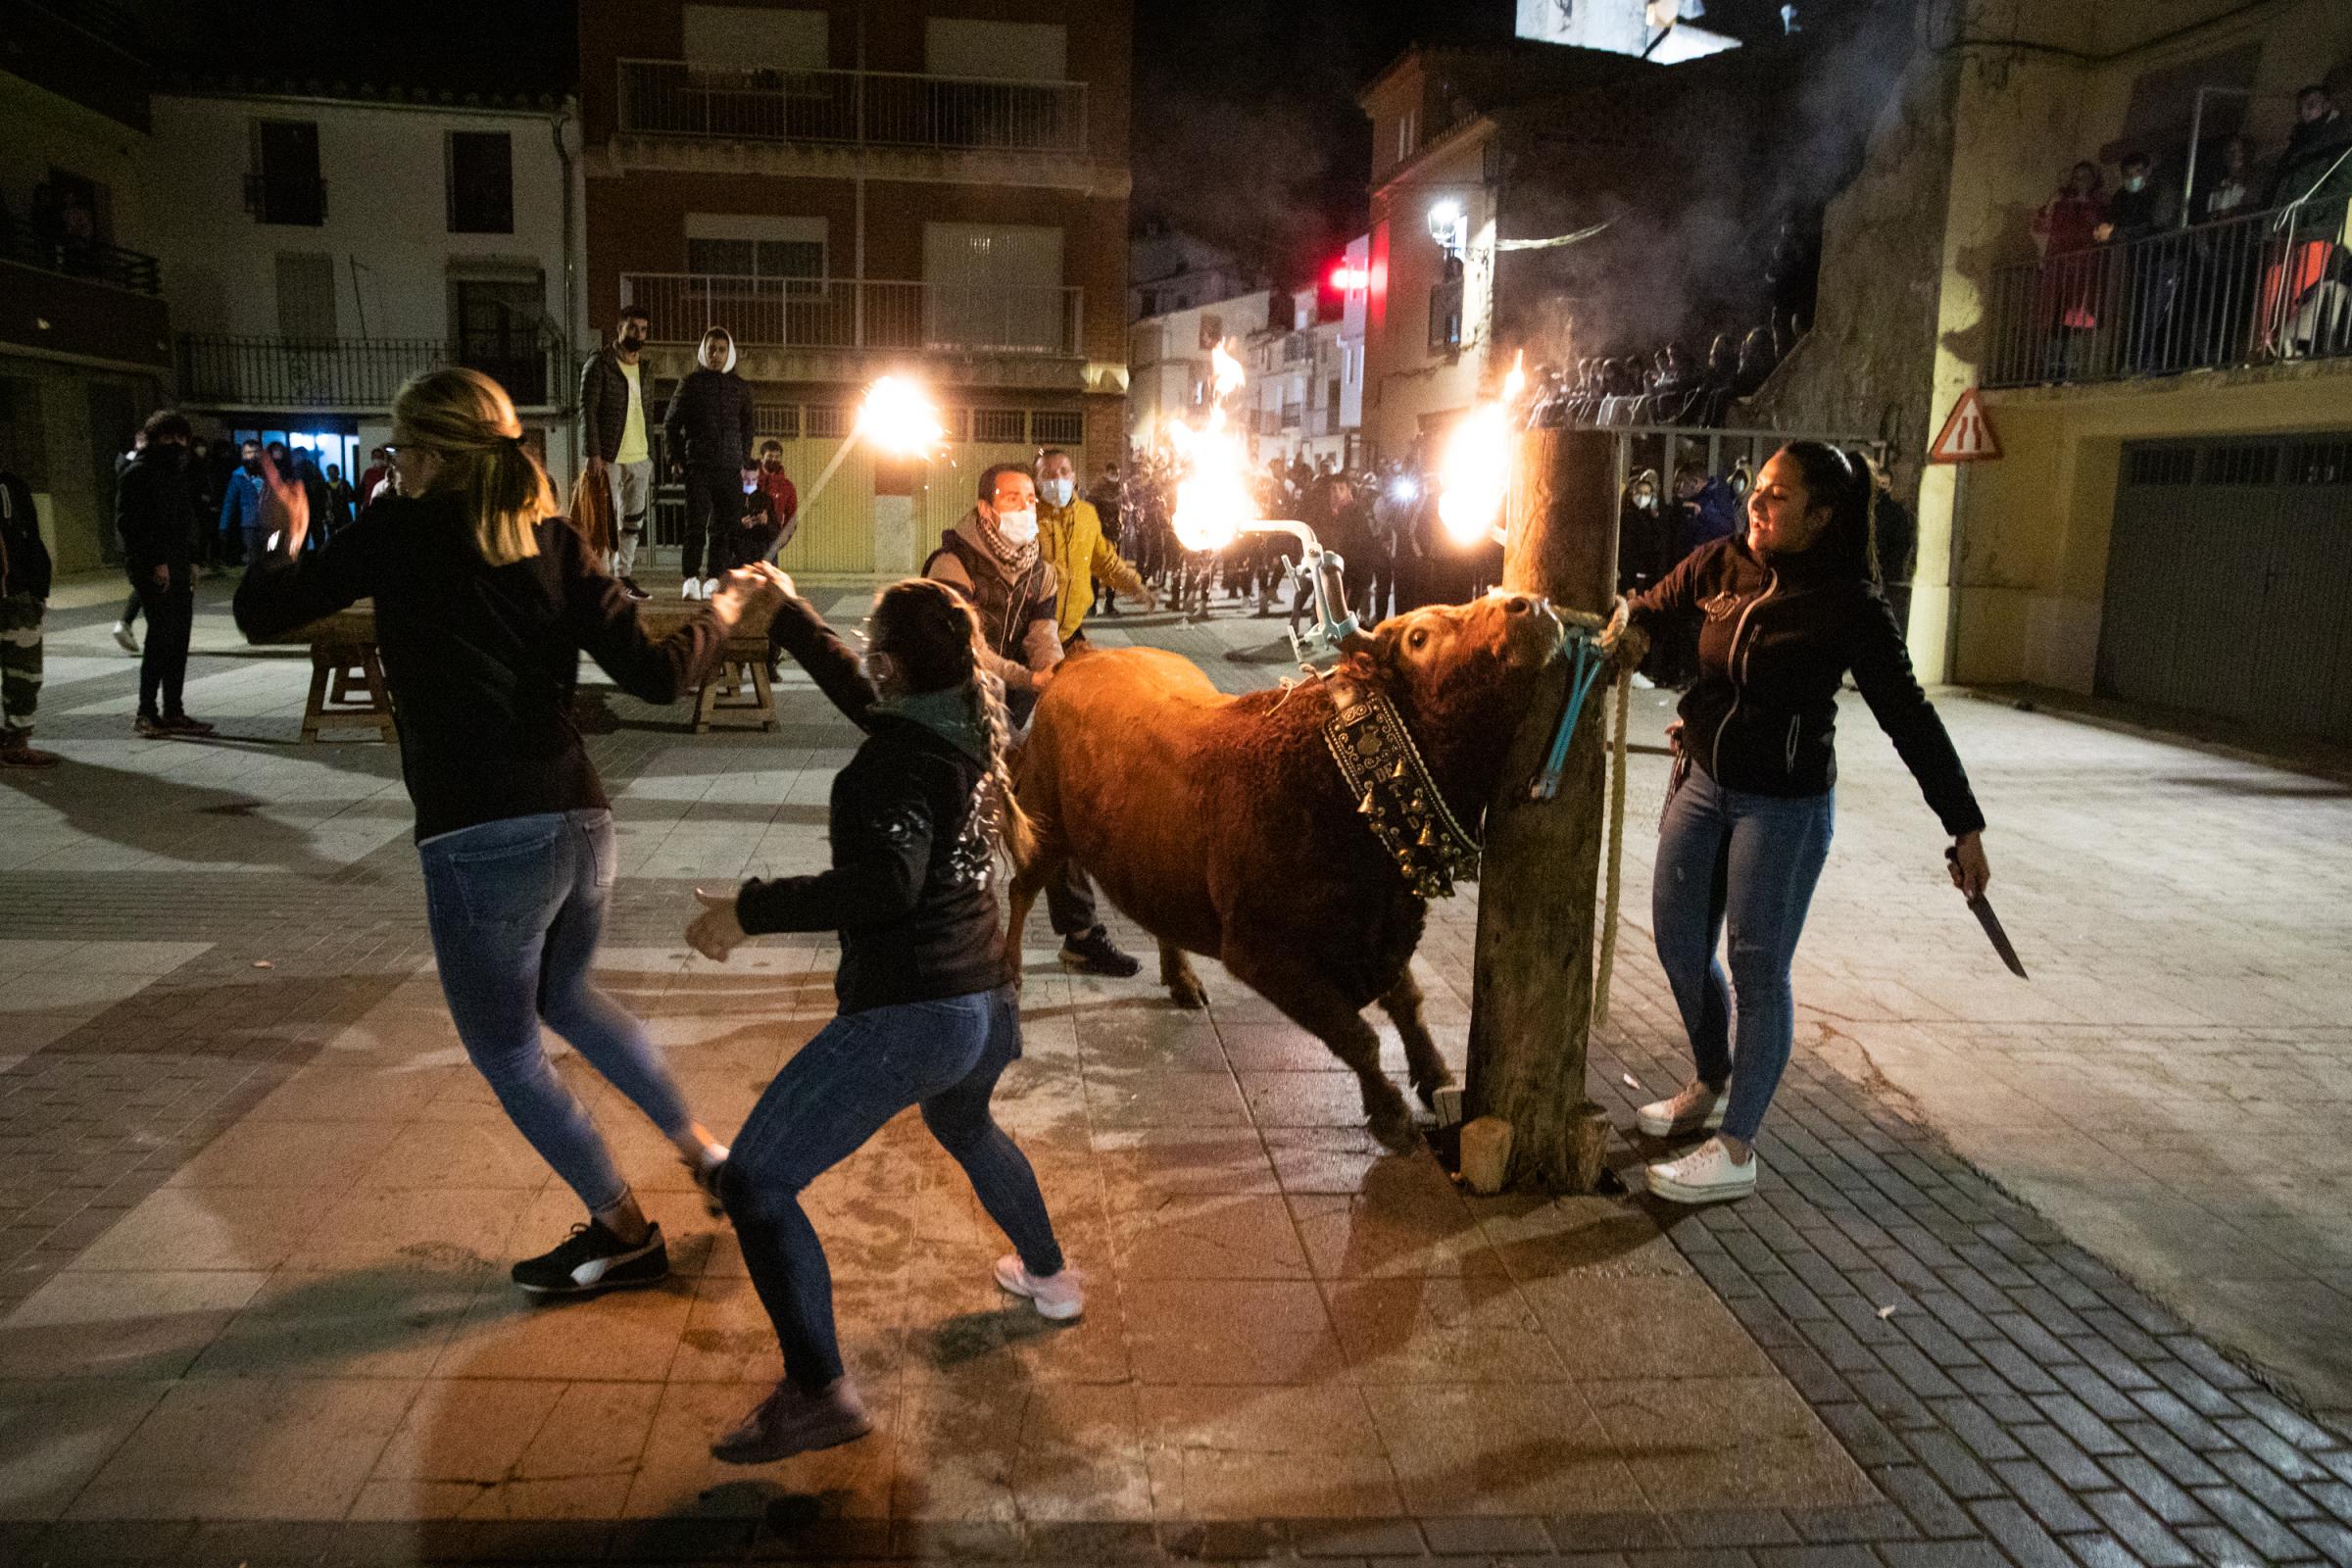 Spain's Dwindling Bullfighting Traditions - VALENCIA, SPAIN - DECEMBER 04: In this traditional...